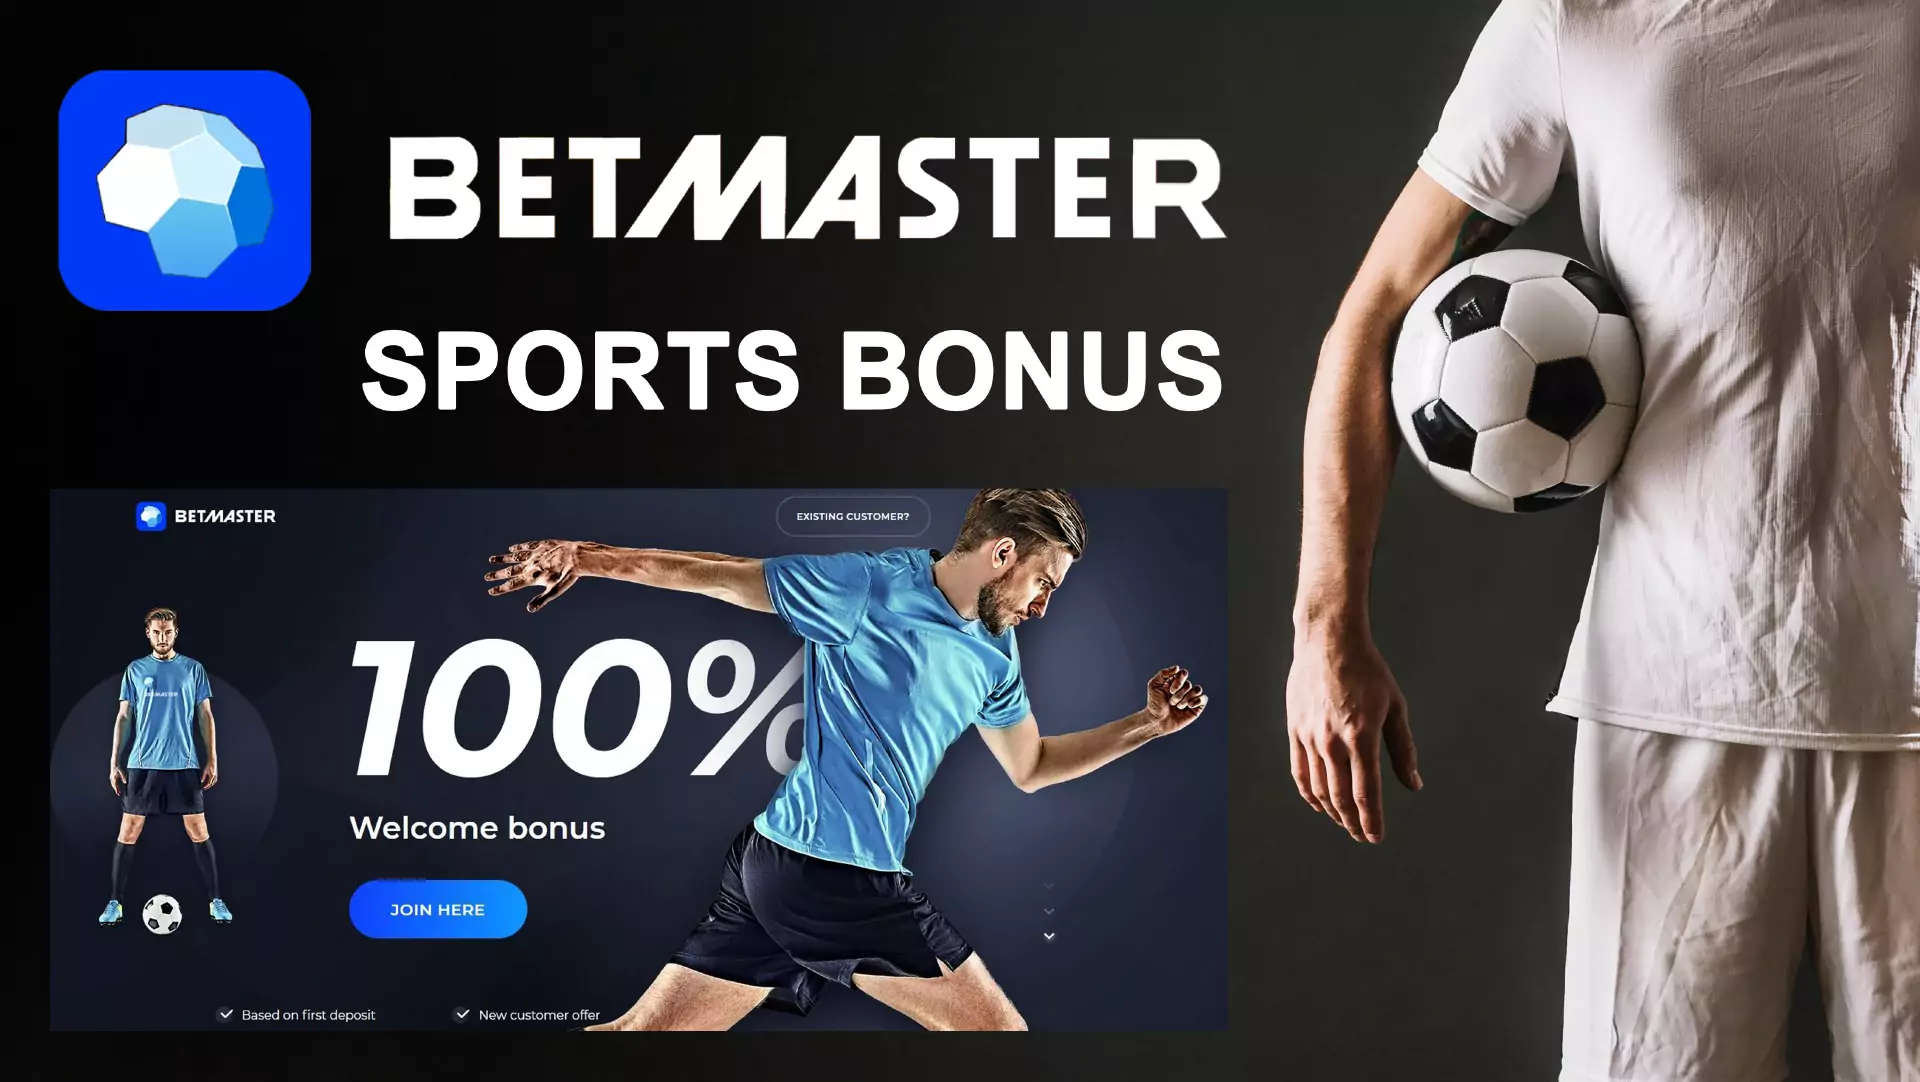 You can receive a welcome sports bonus for betting.